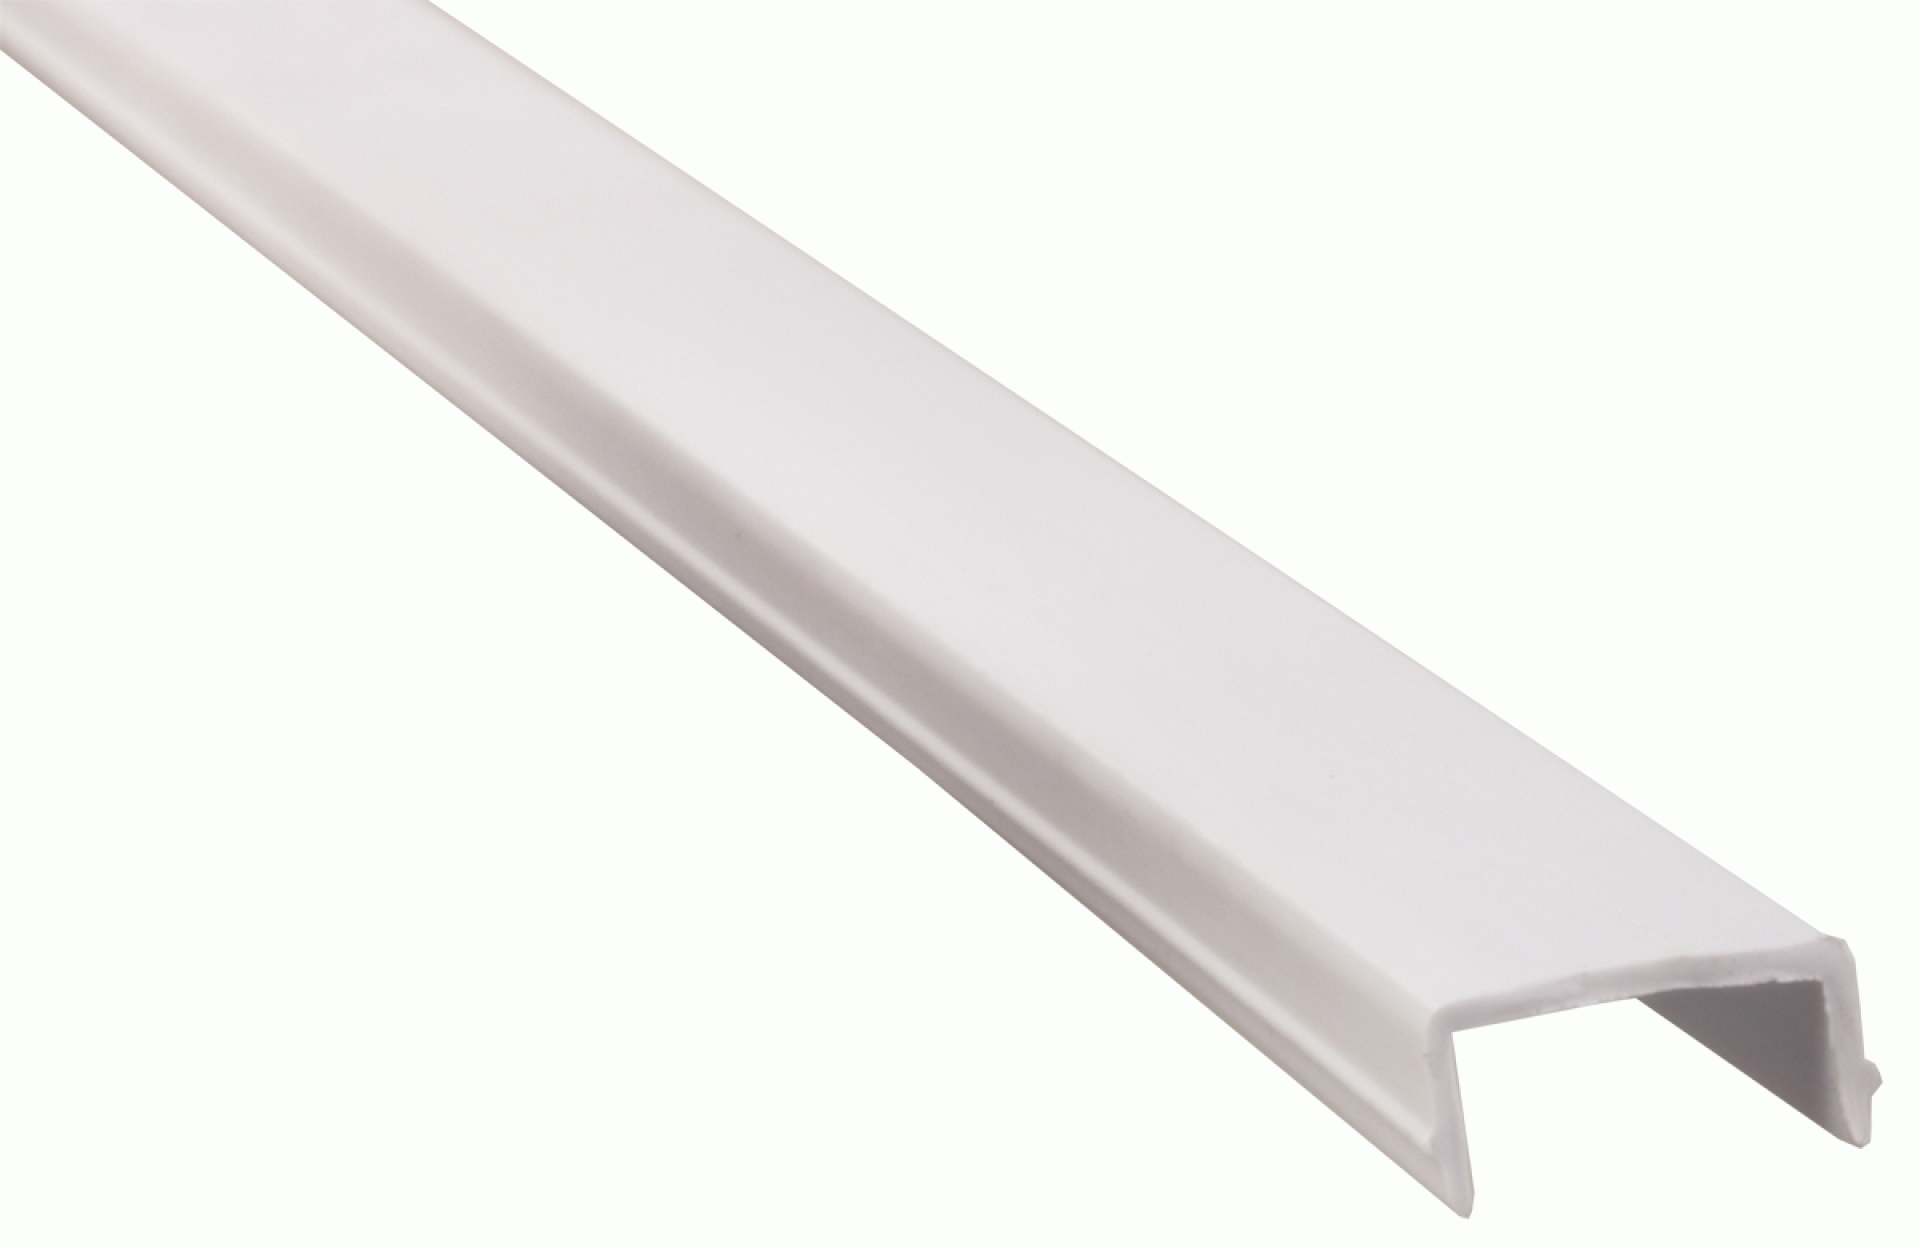 J R PRODUCTS | 11371 | Elixir Style Screw Cover 8' - White